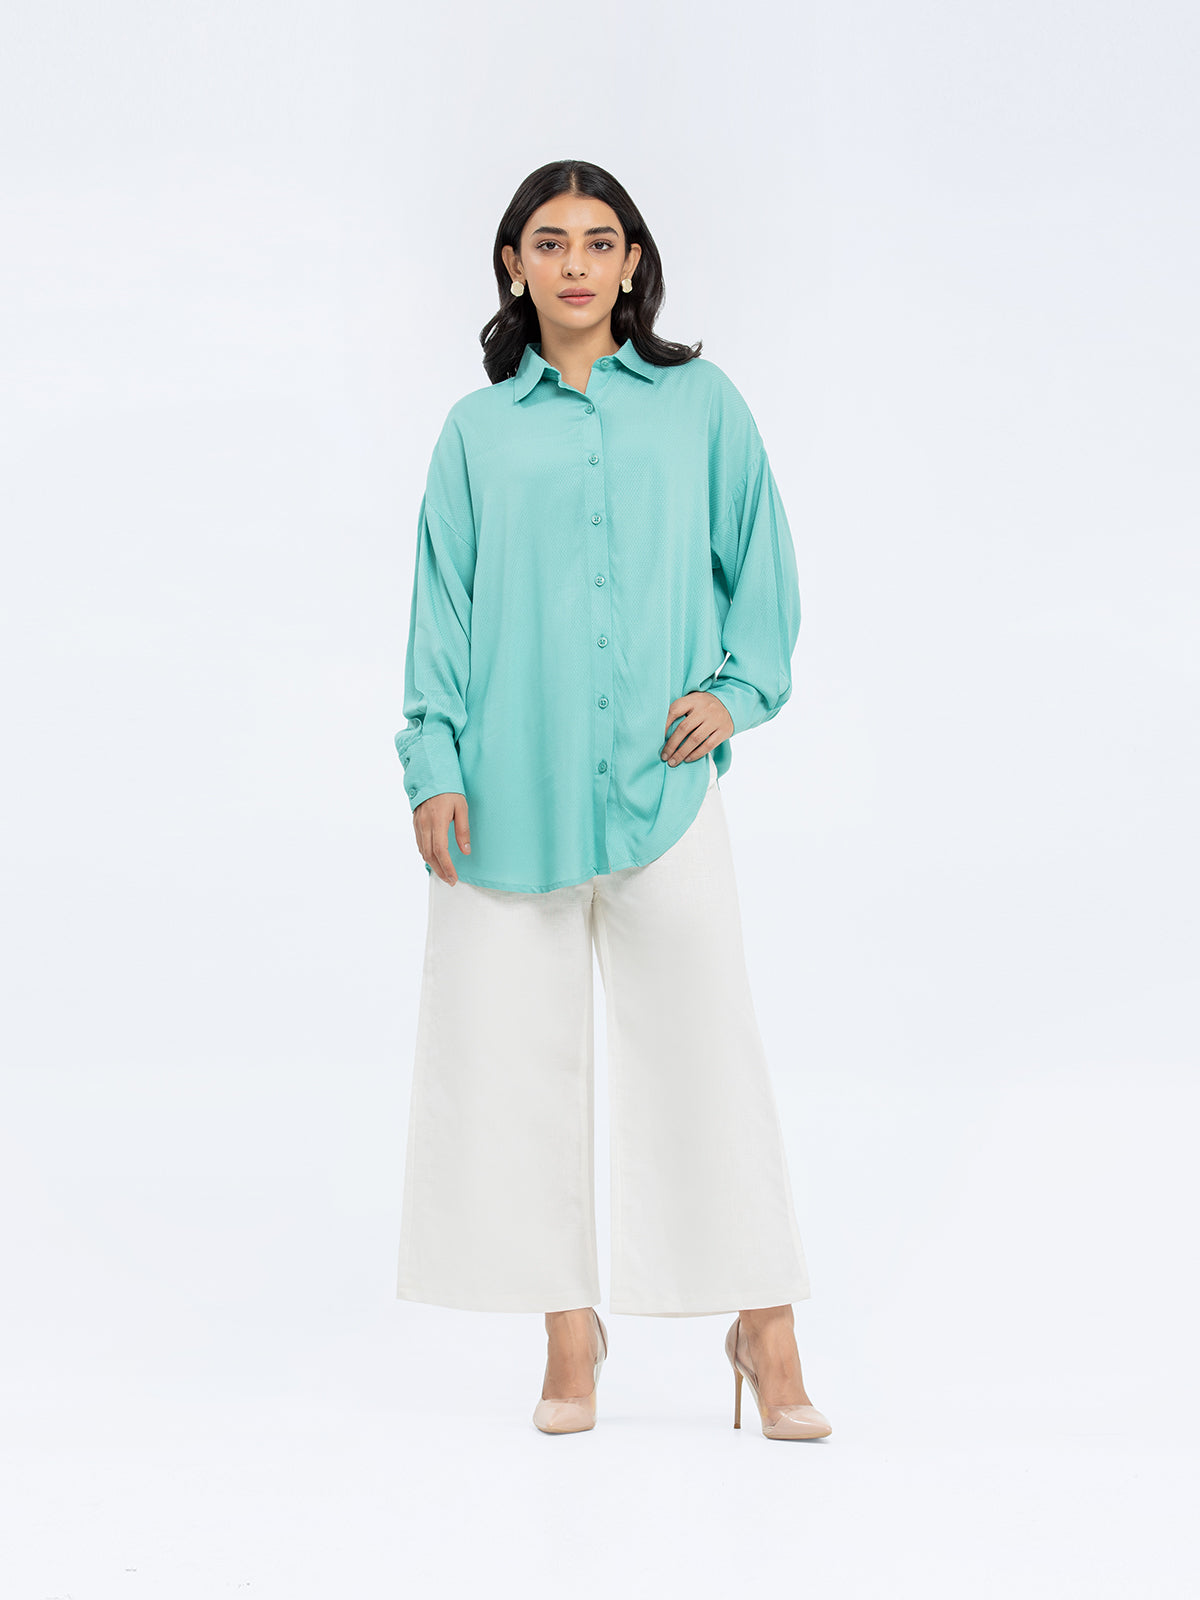 Relaxed Fit Button Up Shirt - FWTS24-075